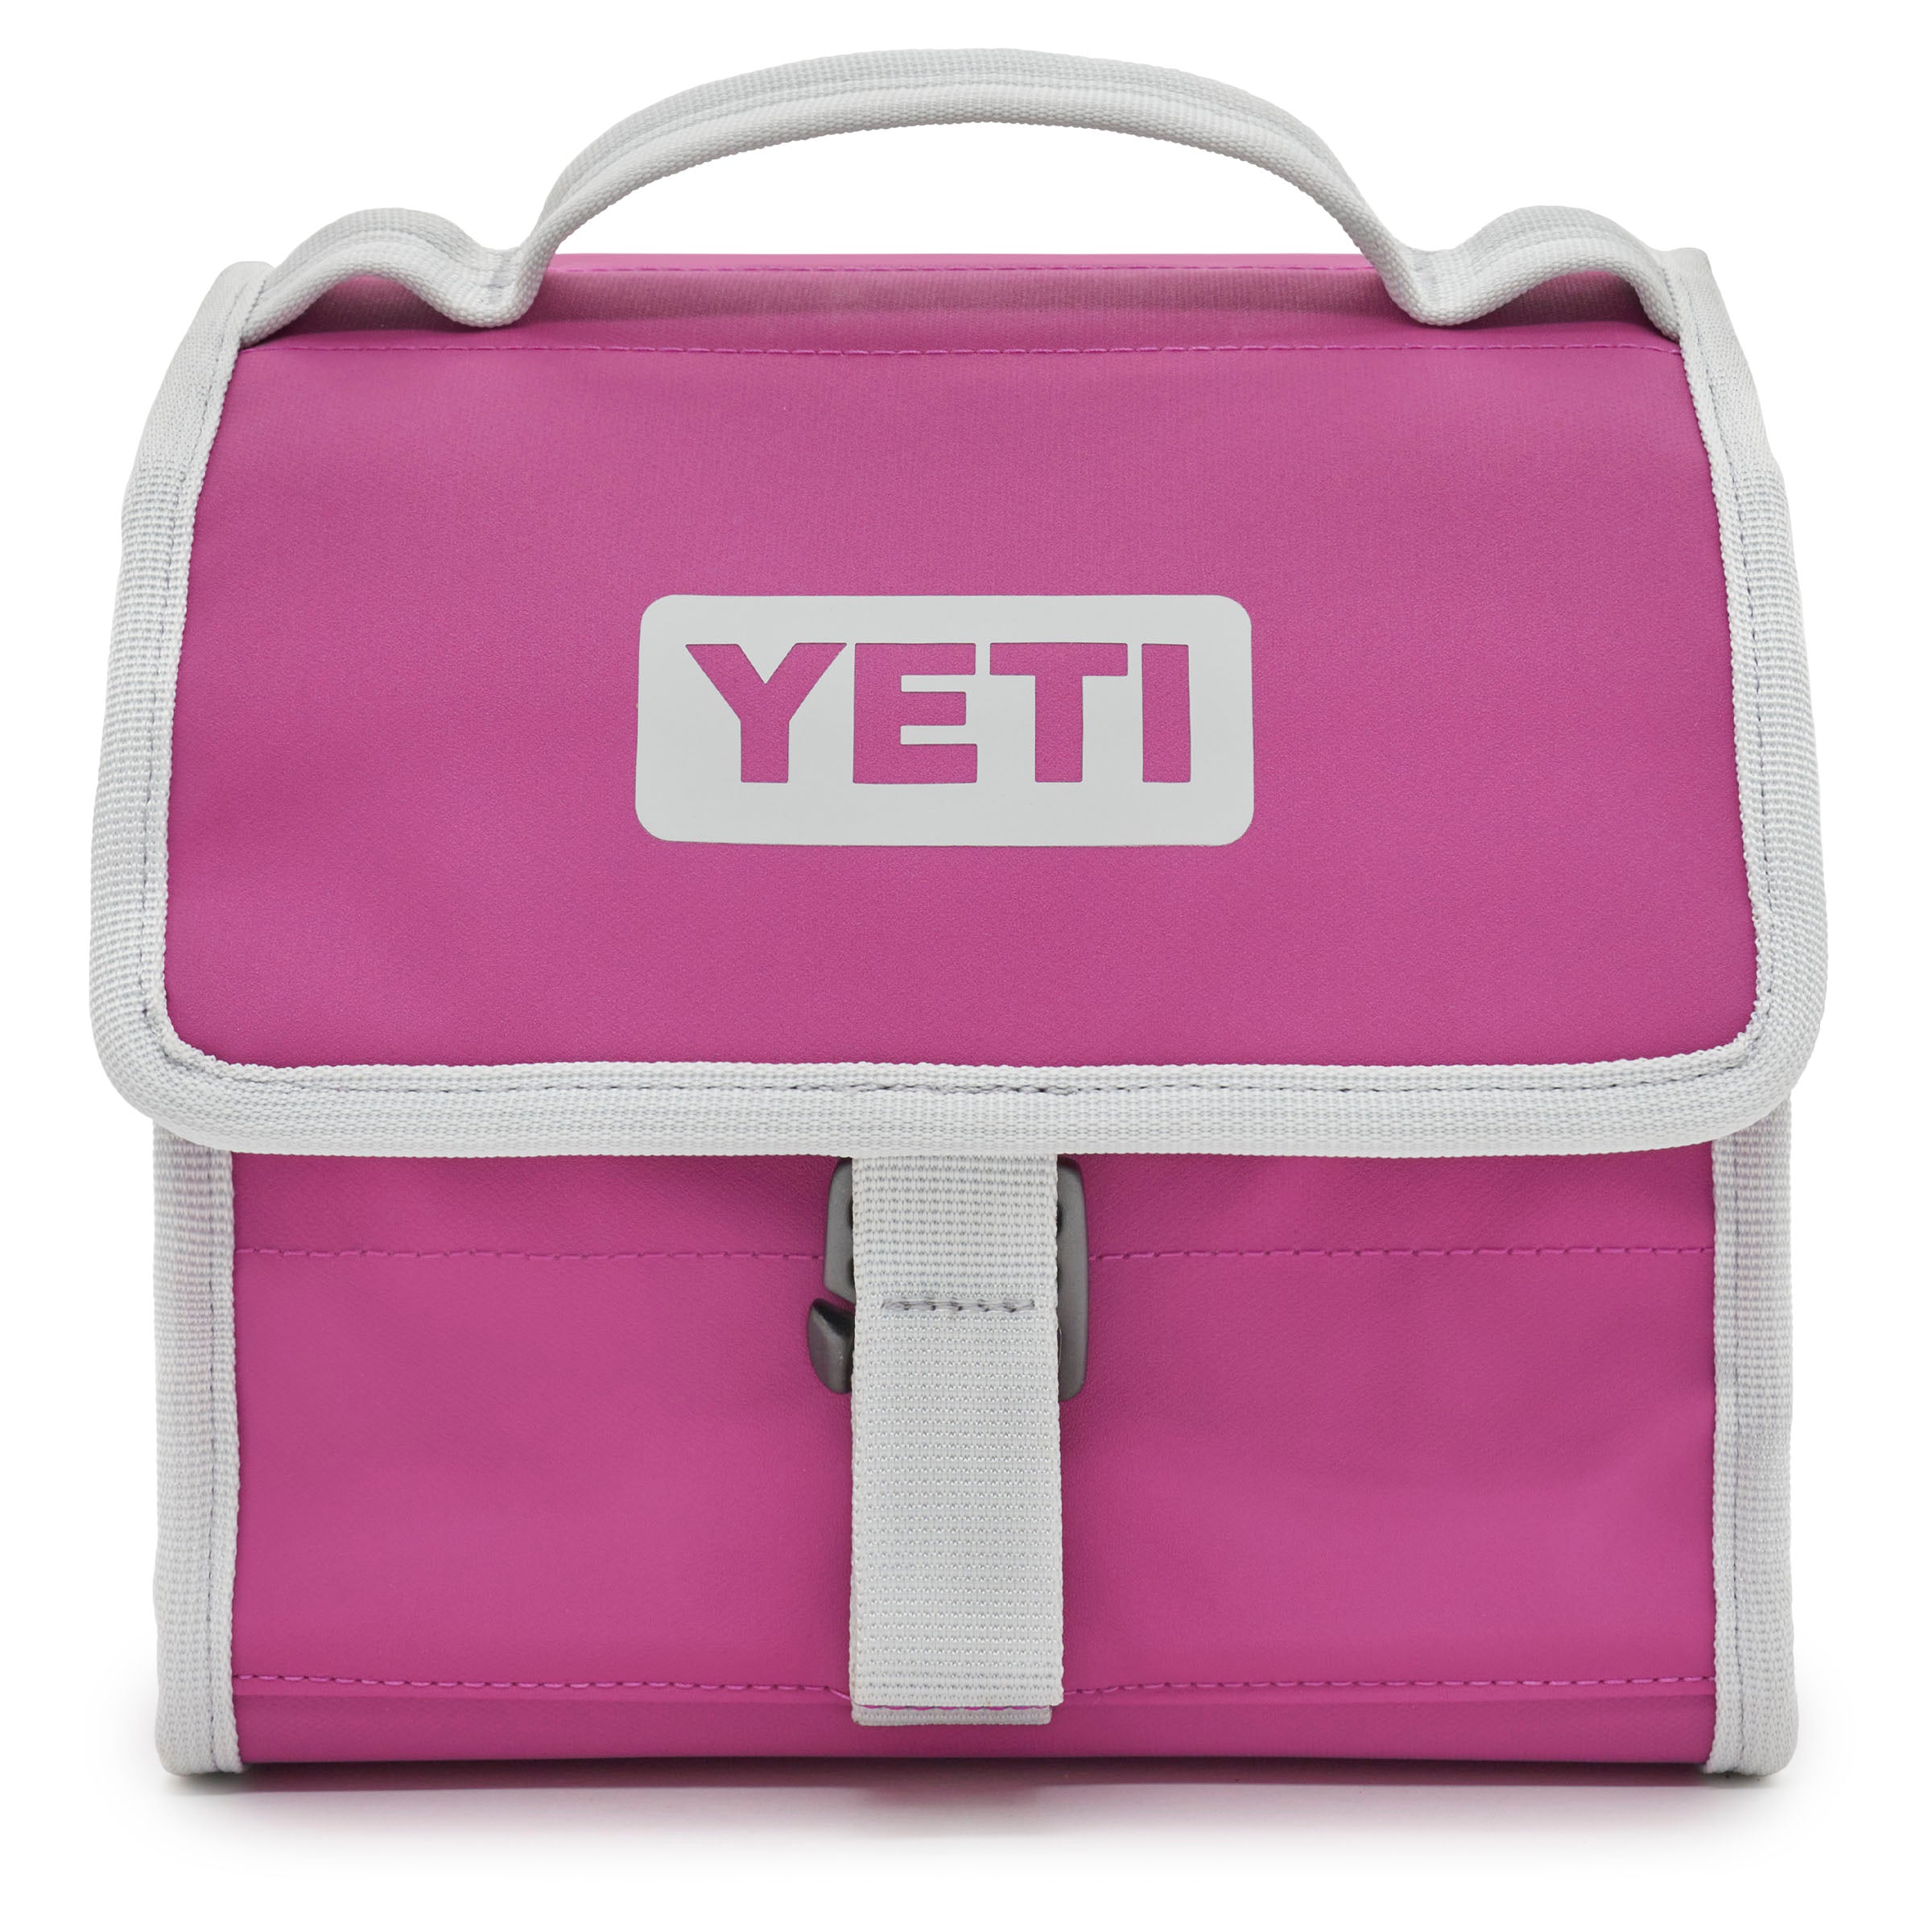 YETI Daytrip Lunch Bag, Coral at